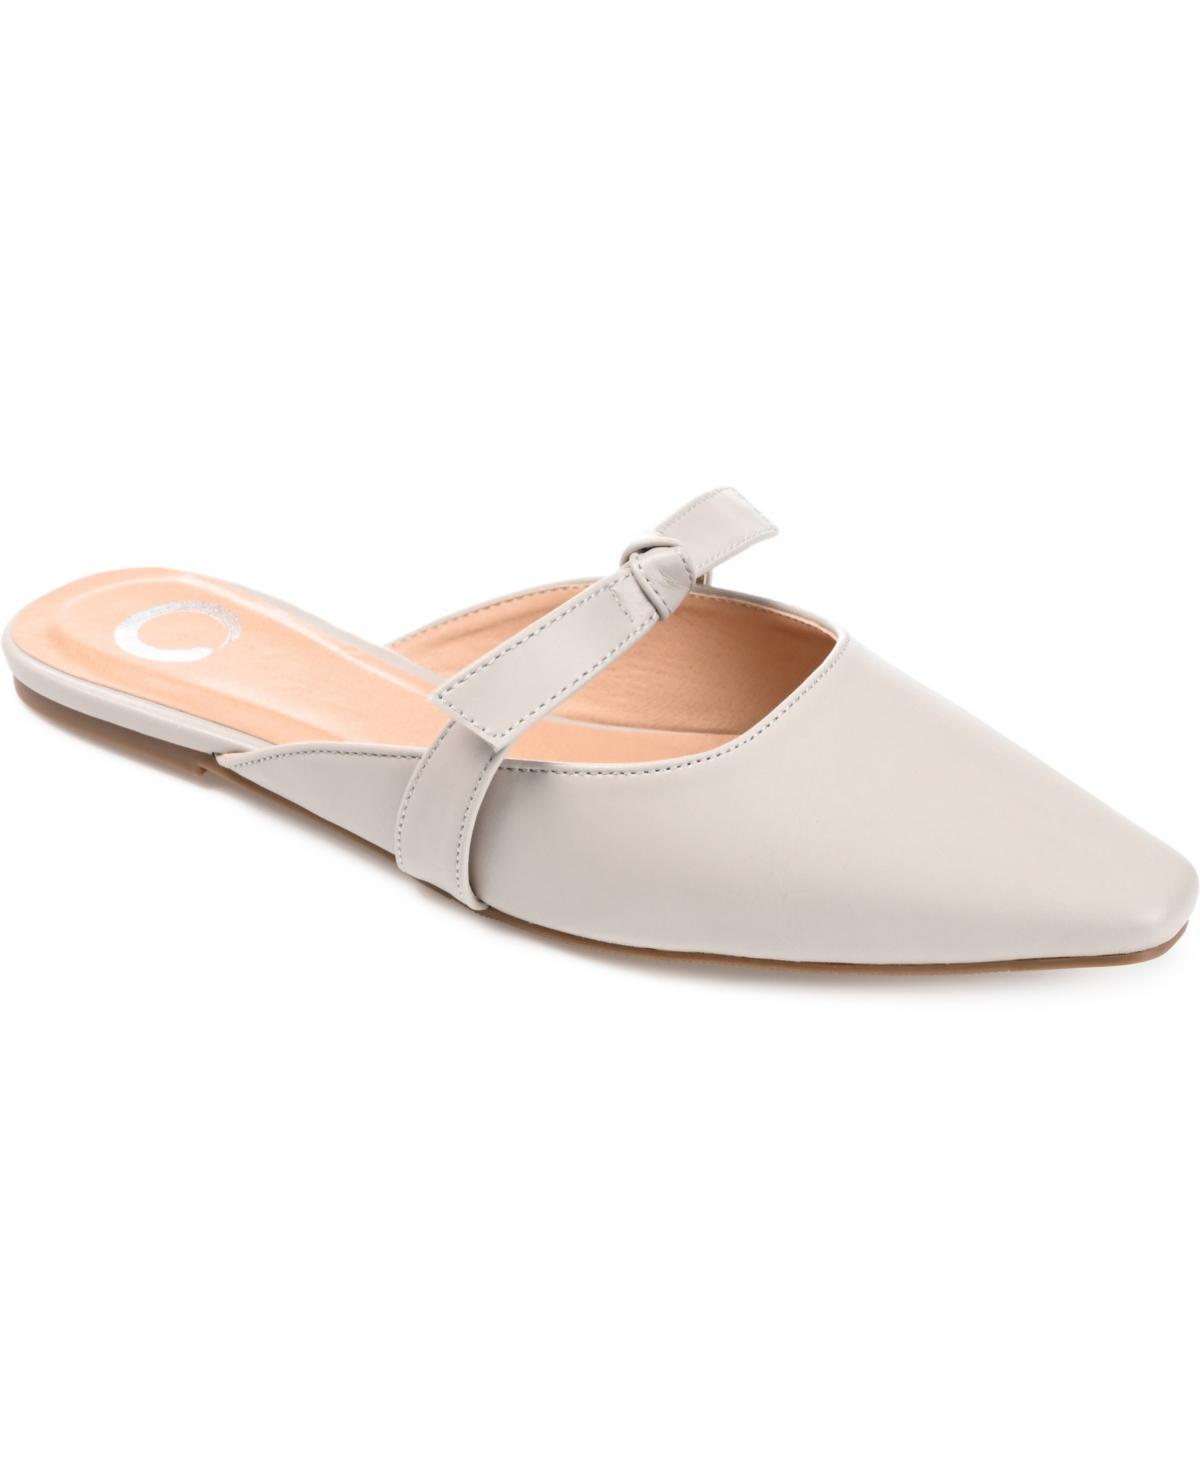 Journee Collection Missie Womens Mules Grey Product Image